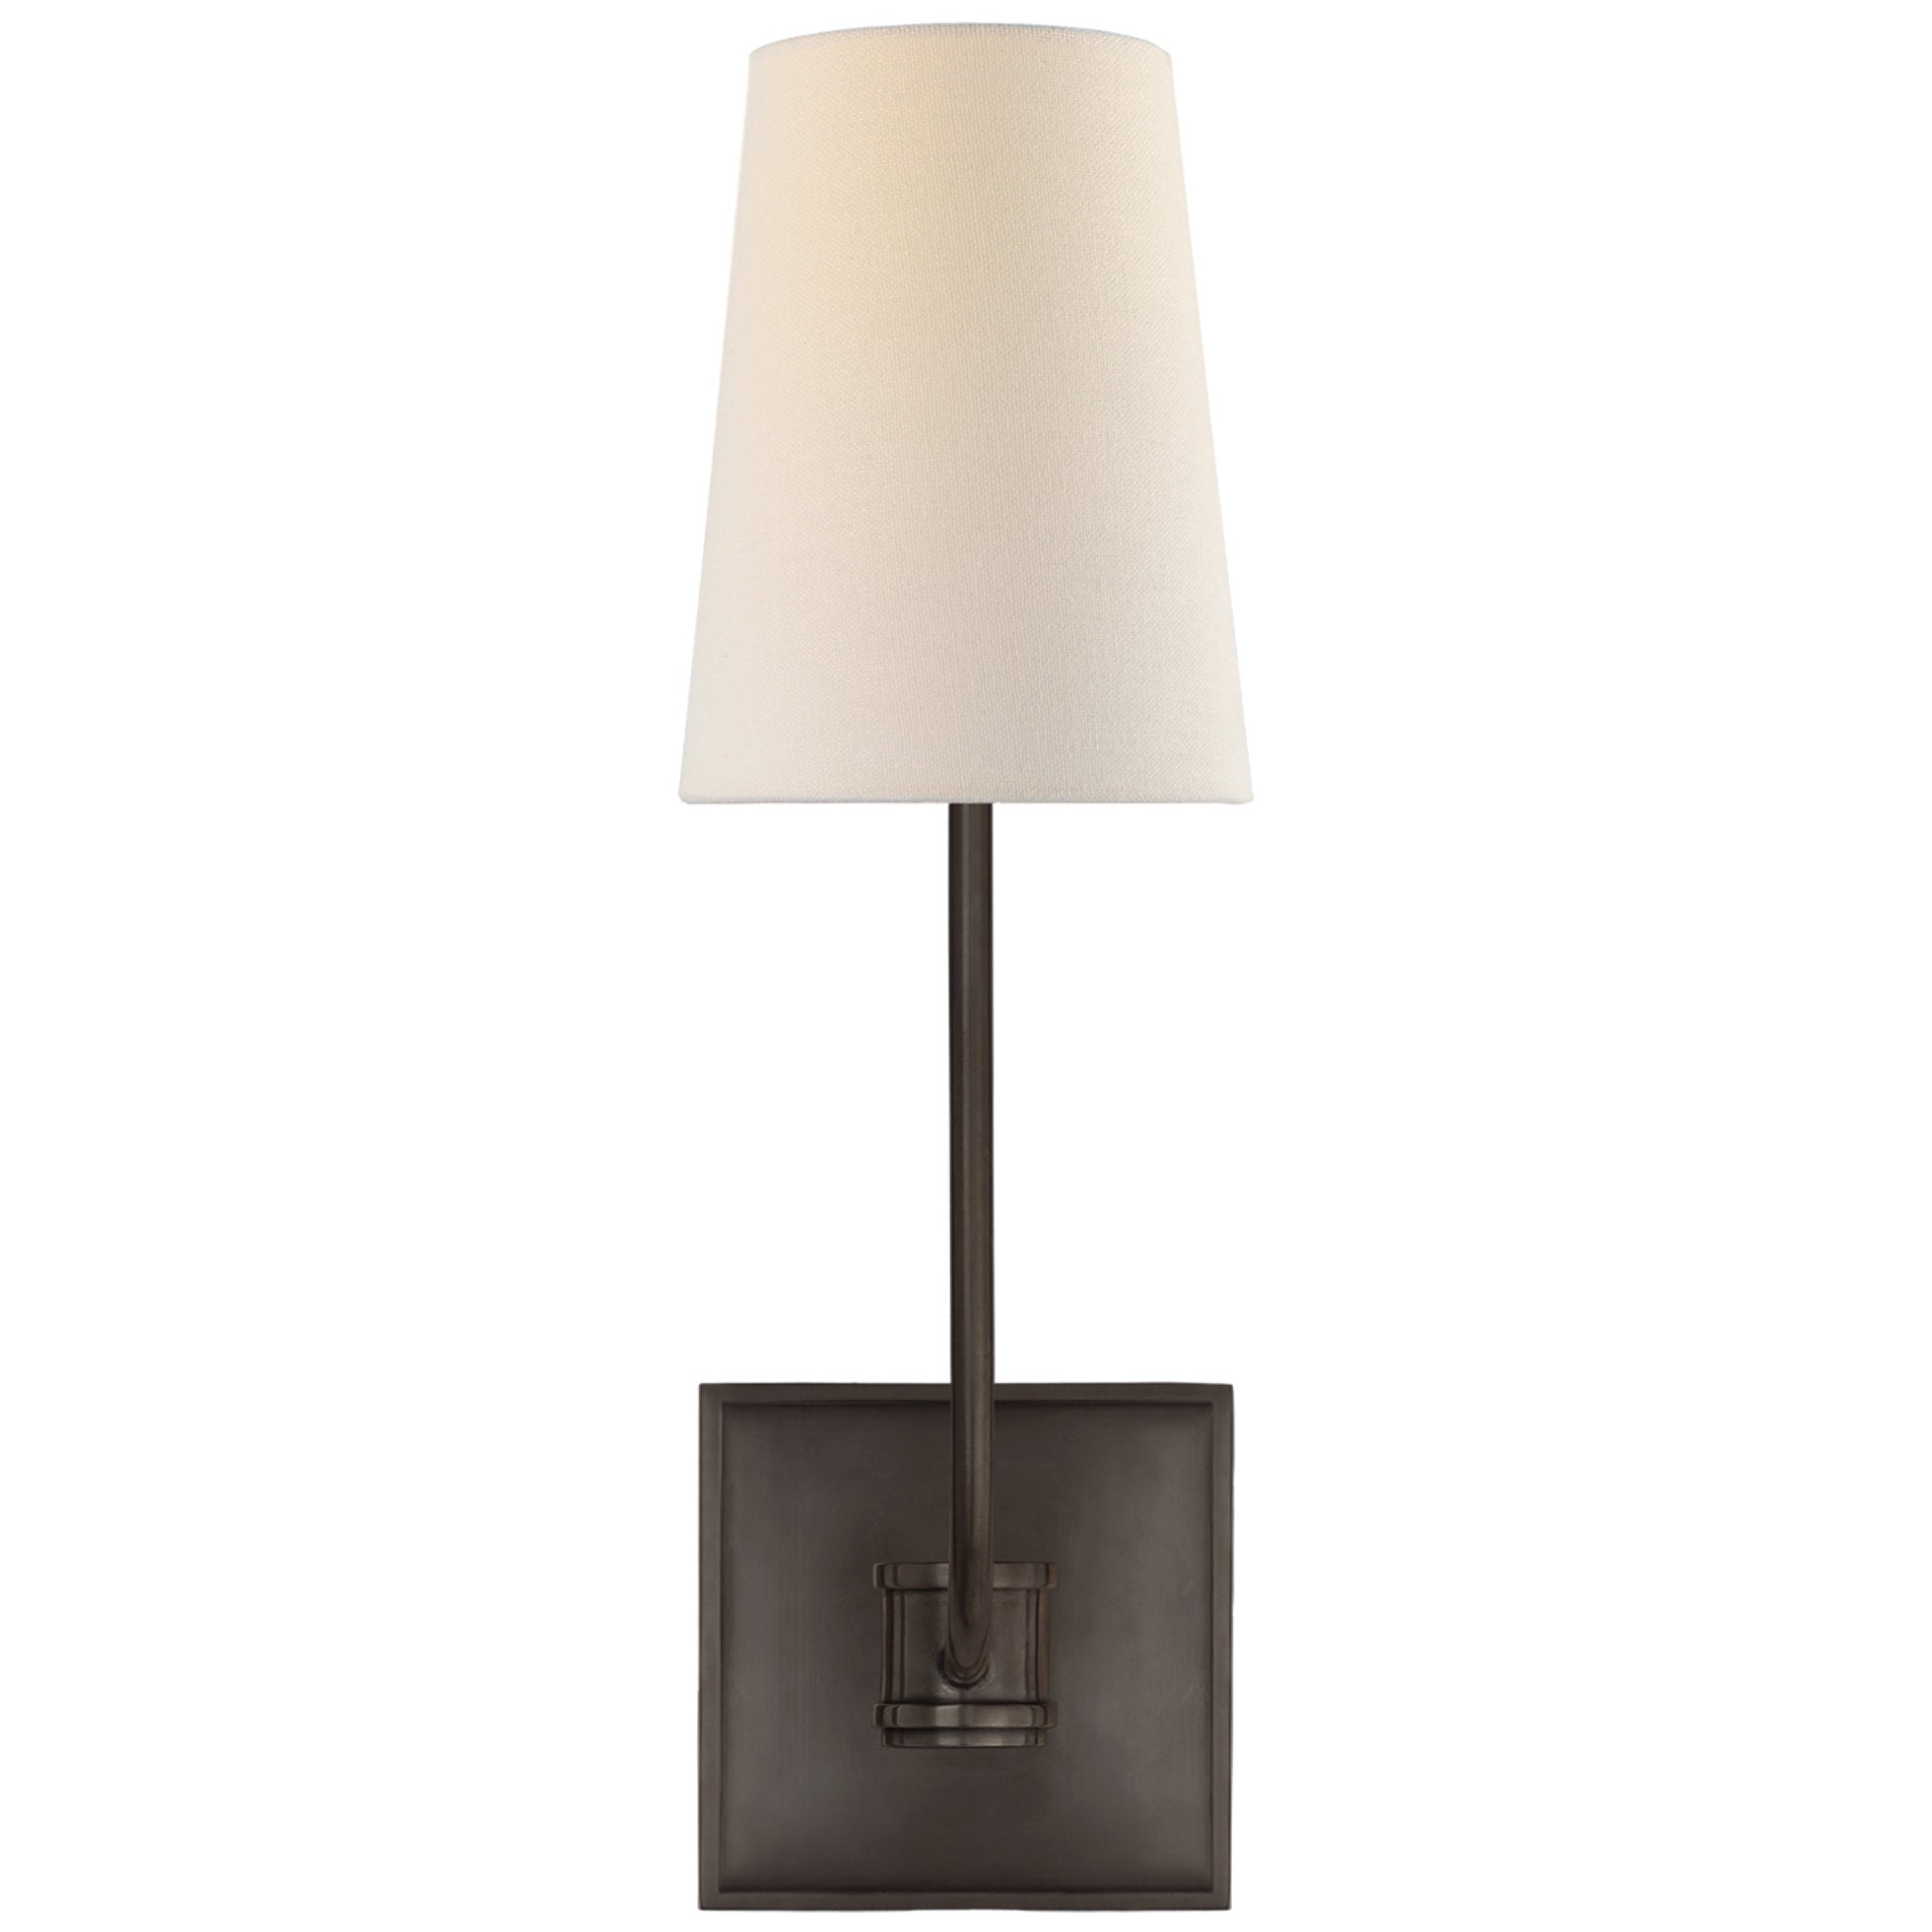 Chapman & Myers Venini Single Sconce in Bronze with Linen Shade